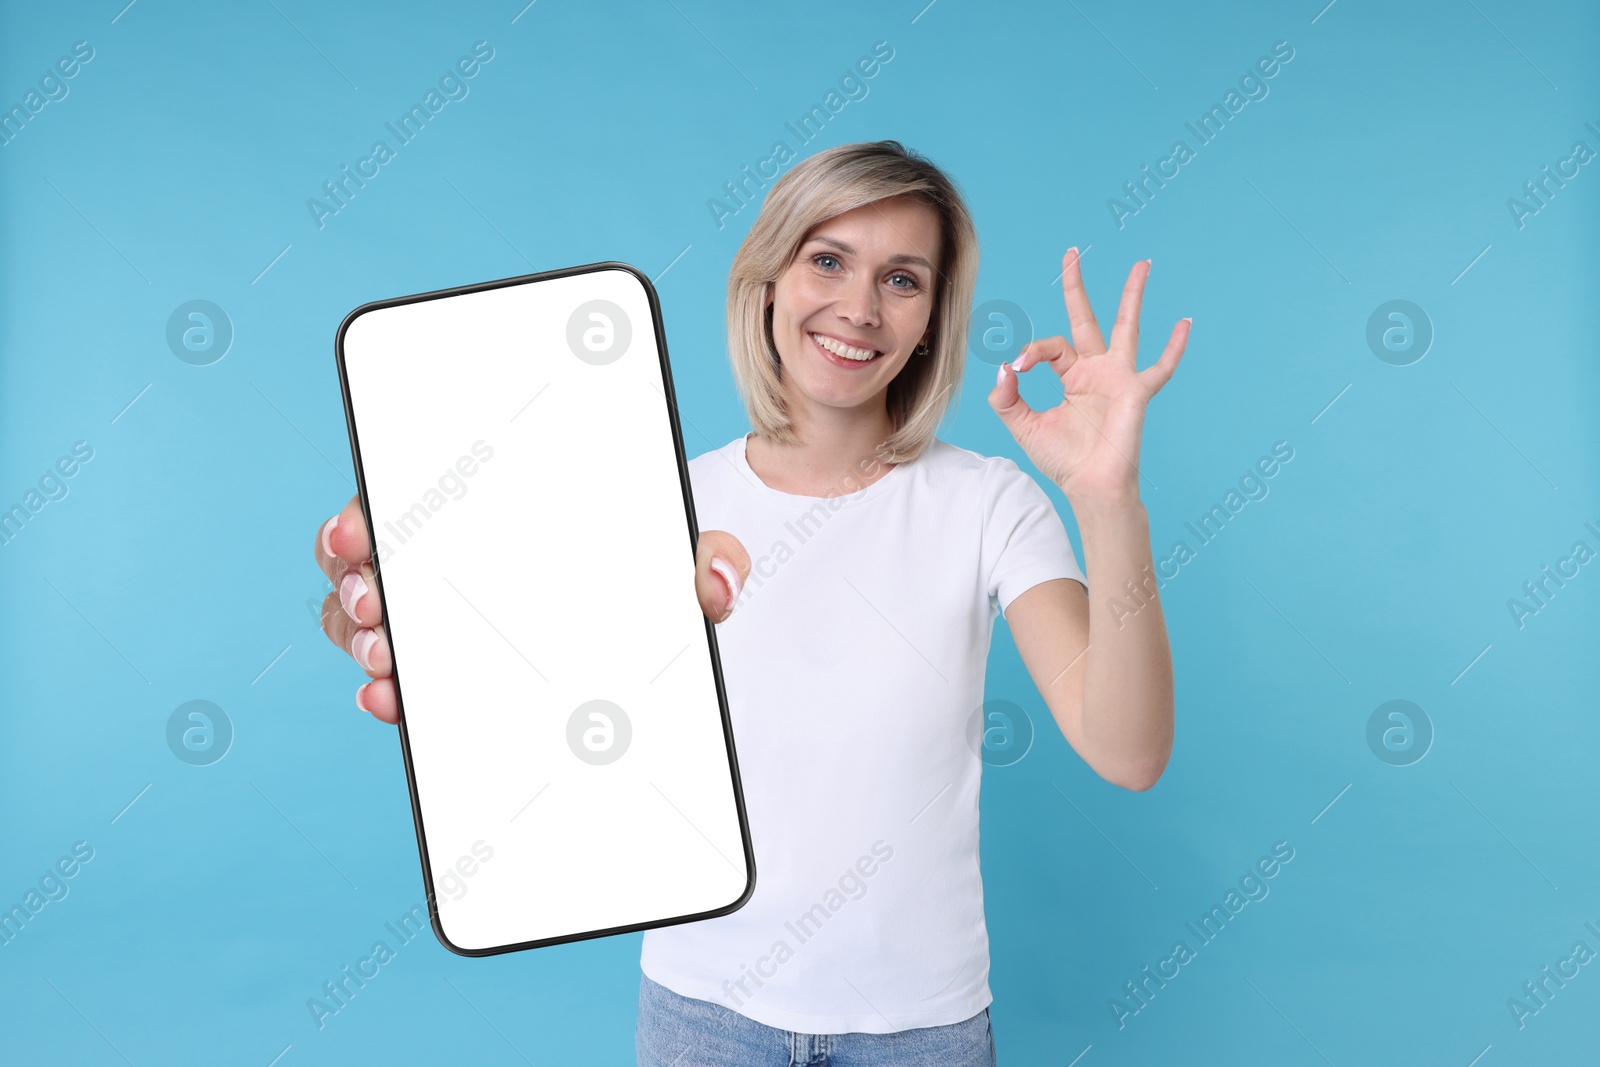 Image of Happy woman showing mobile phone with blank screen on light blue background. Mockup for design